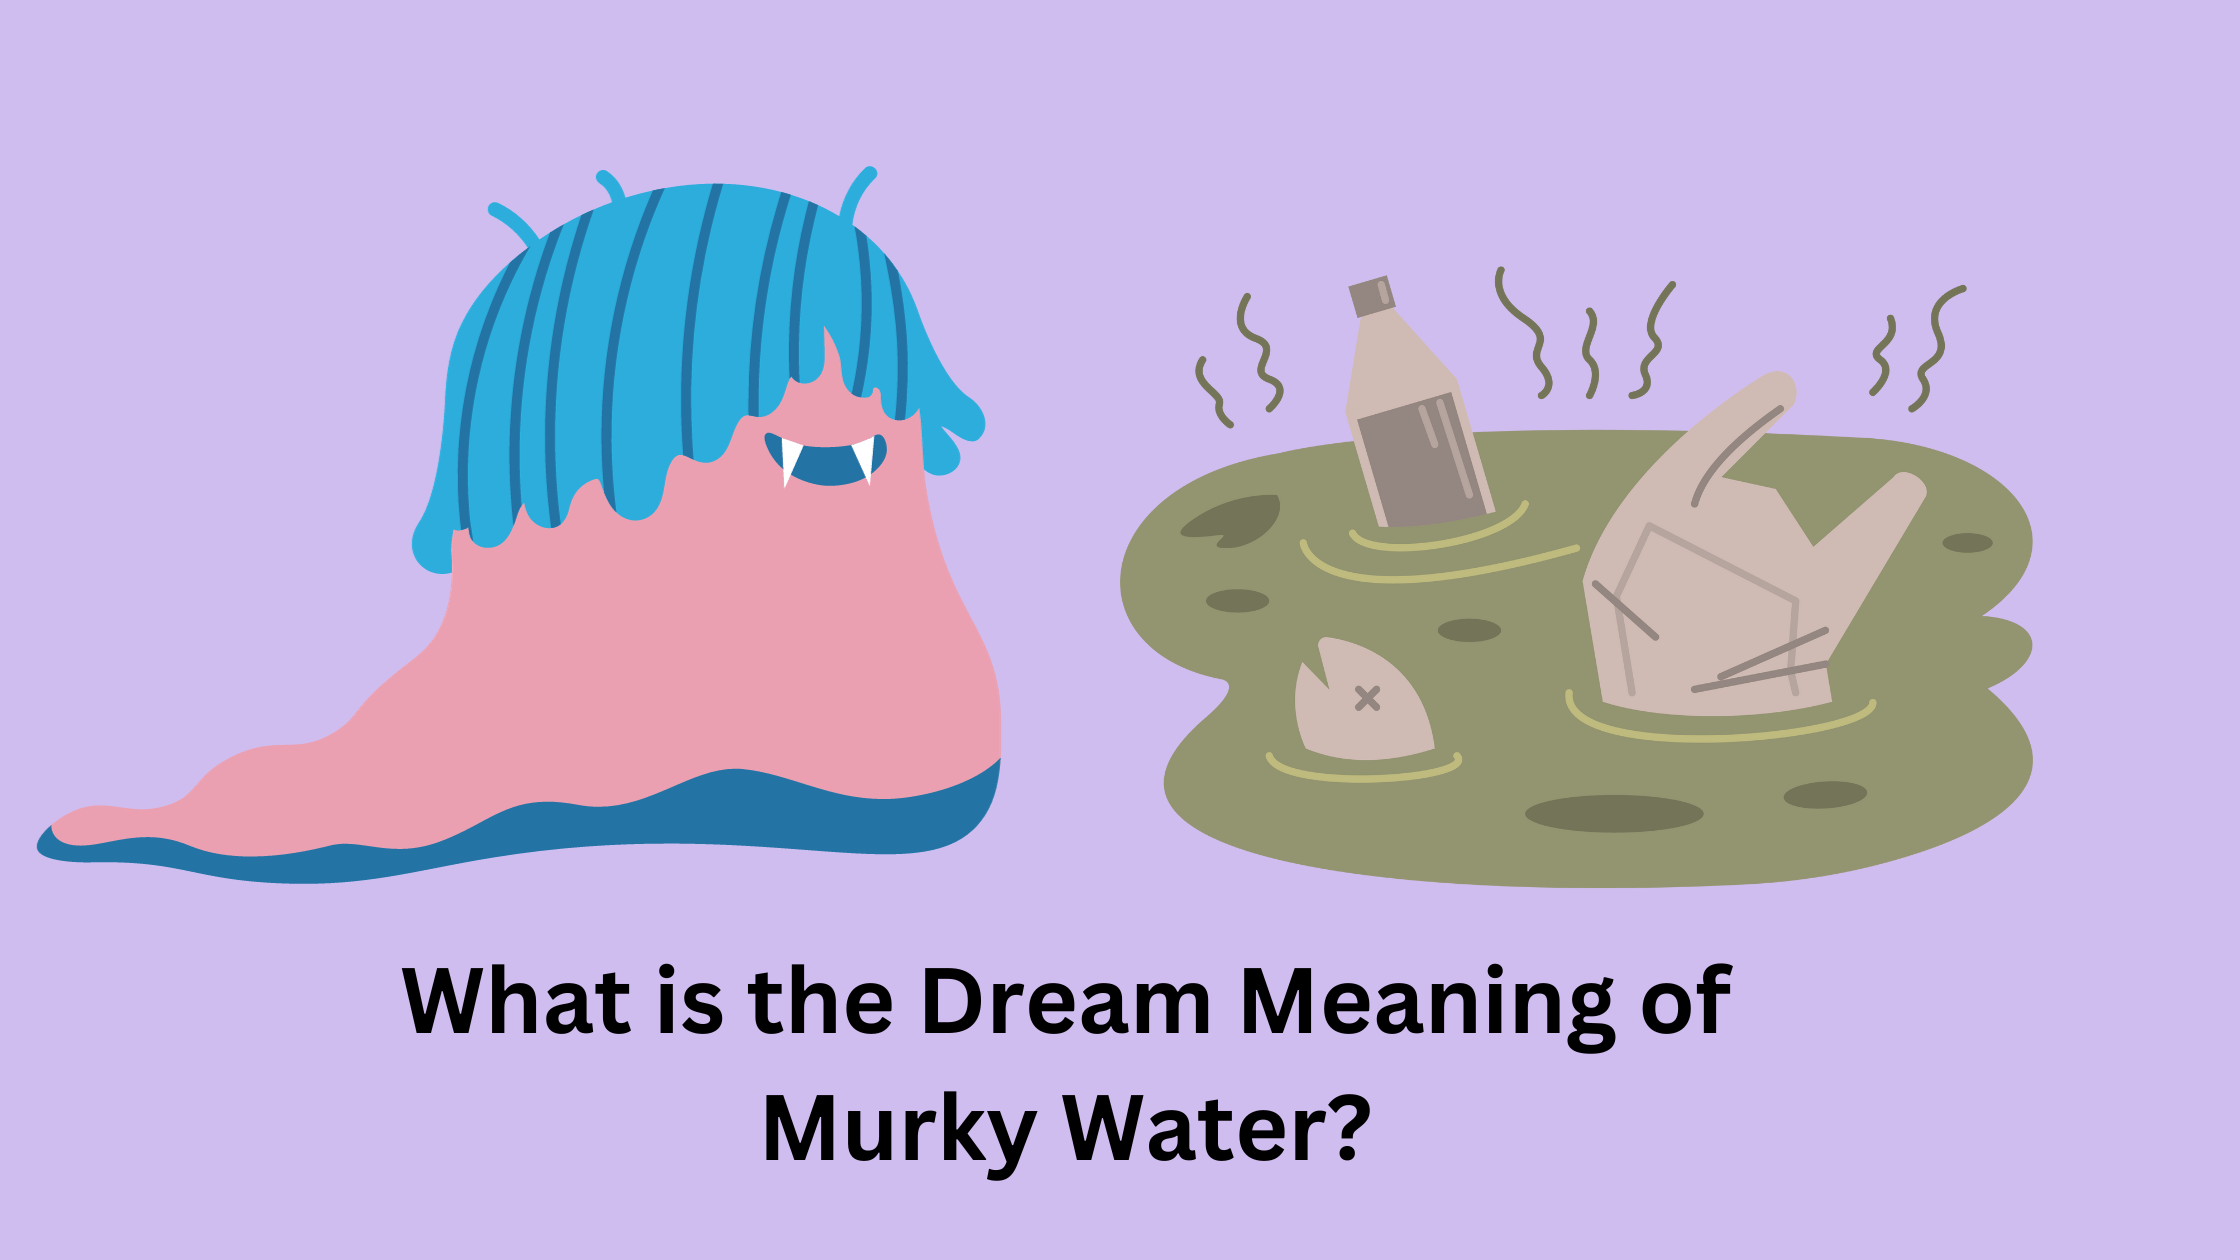 What is the Dream Meaning of Murky Water?